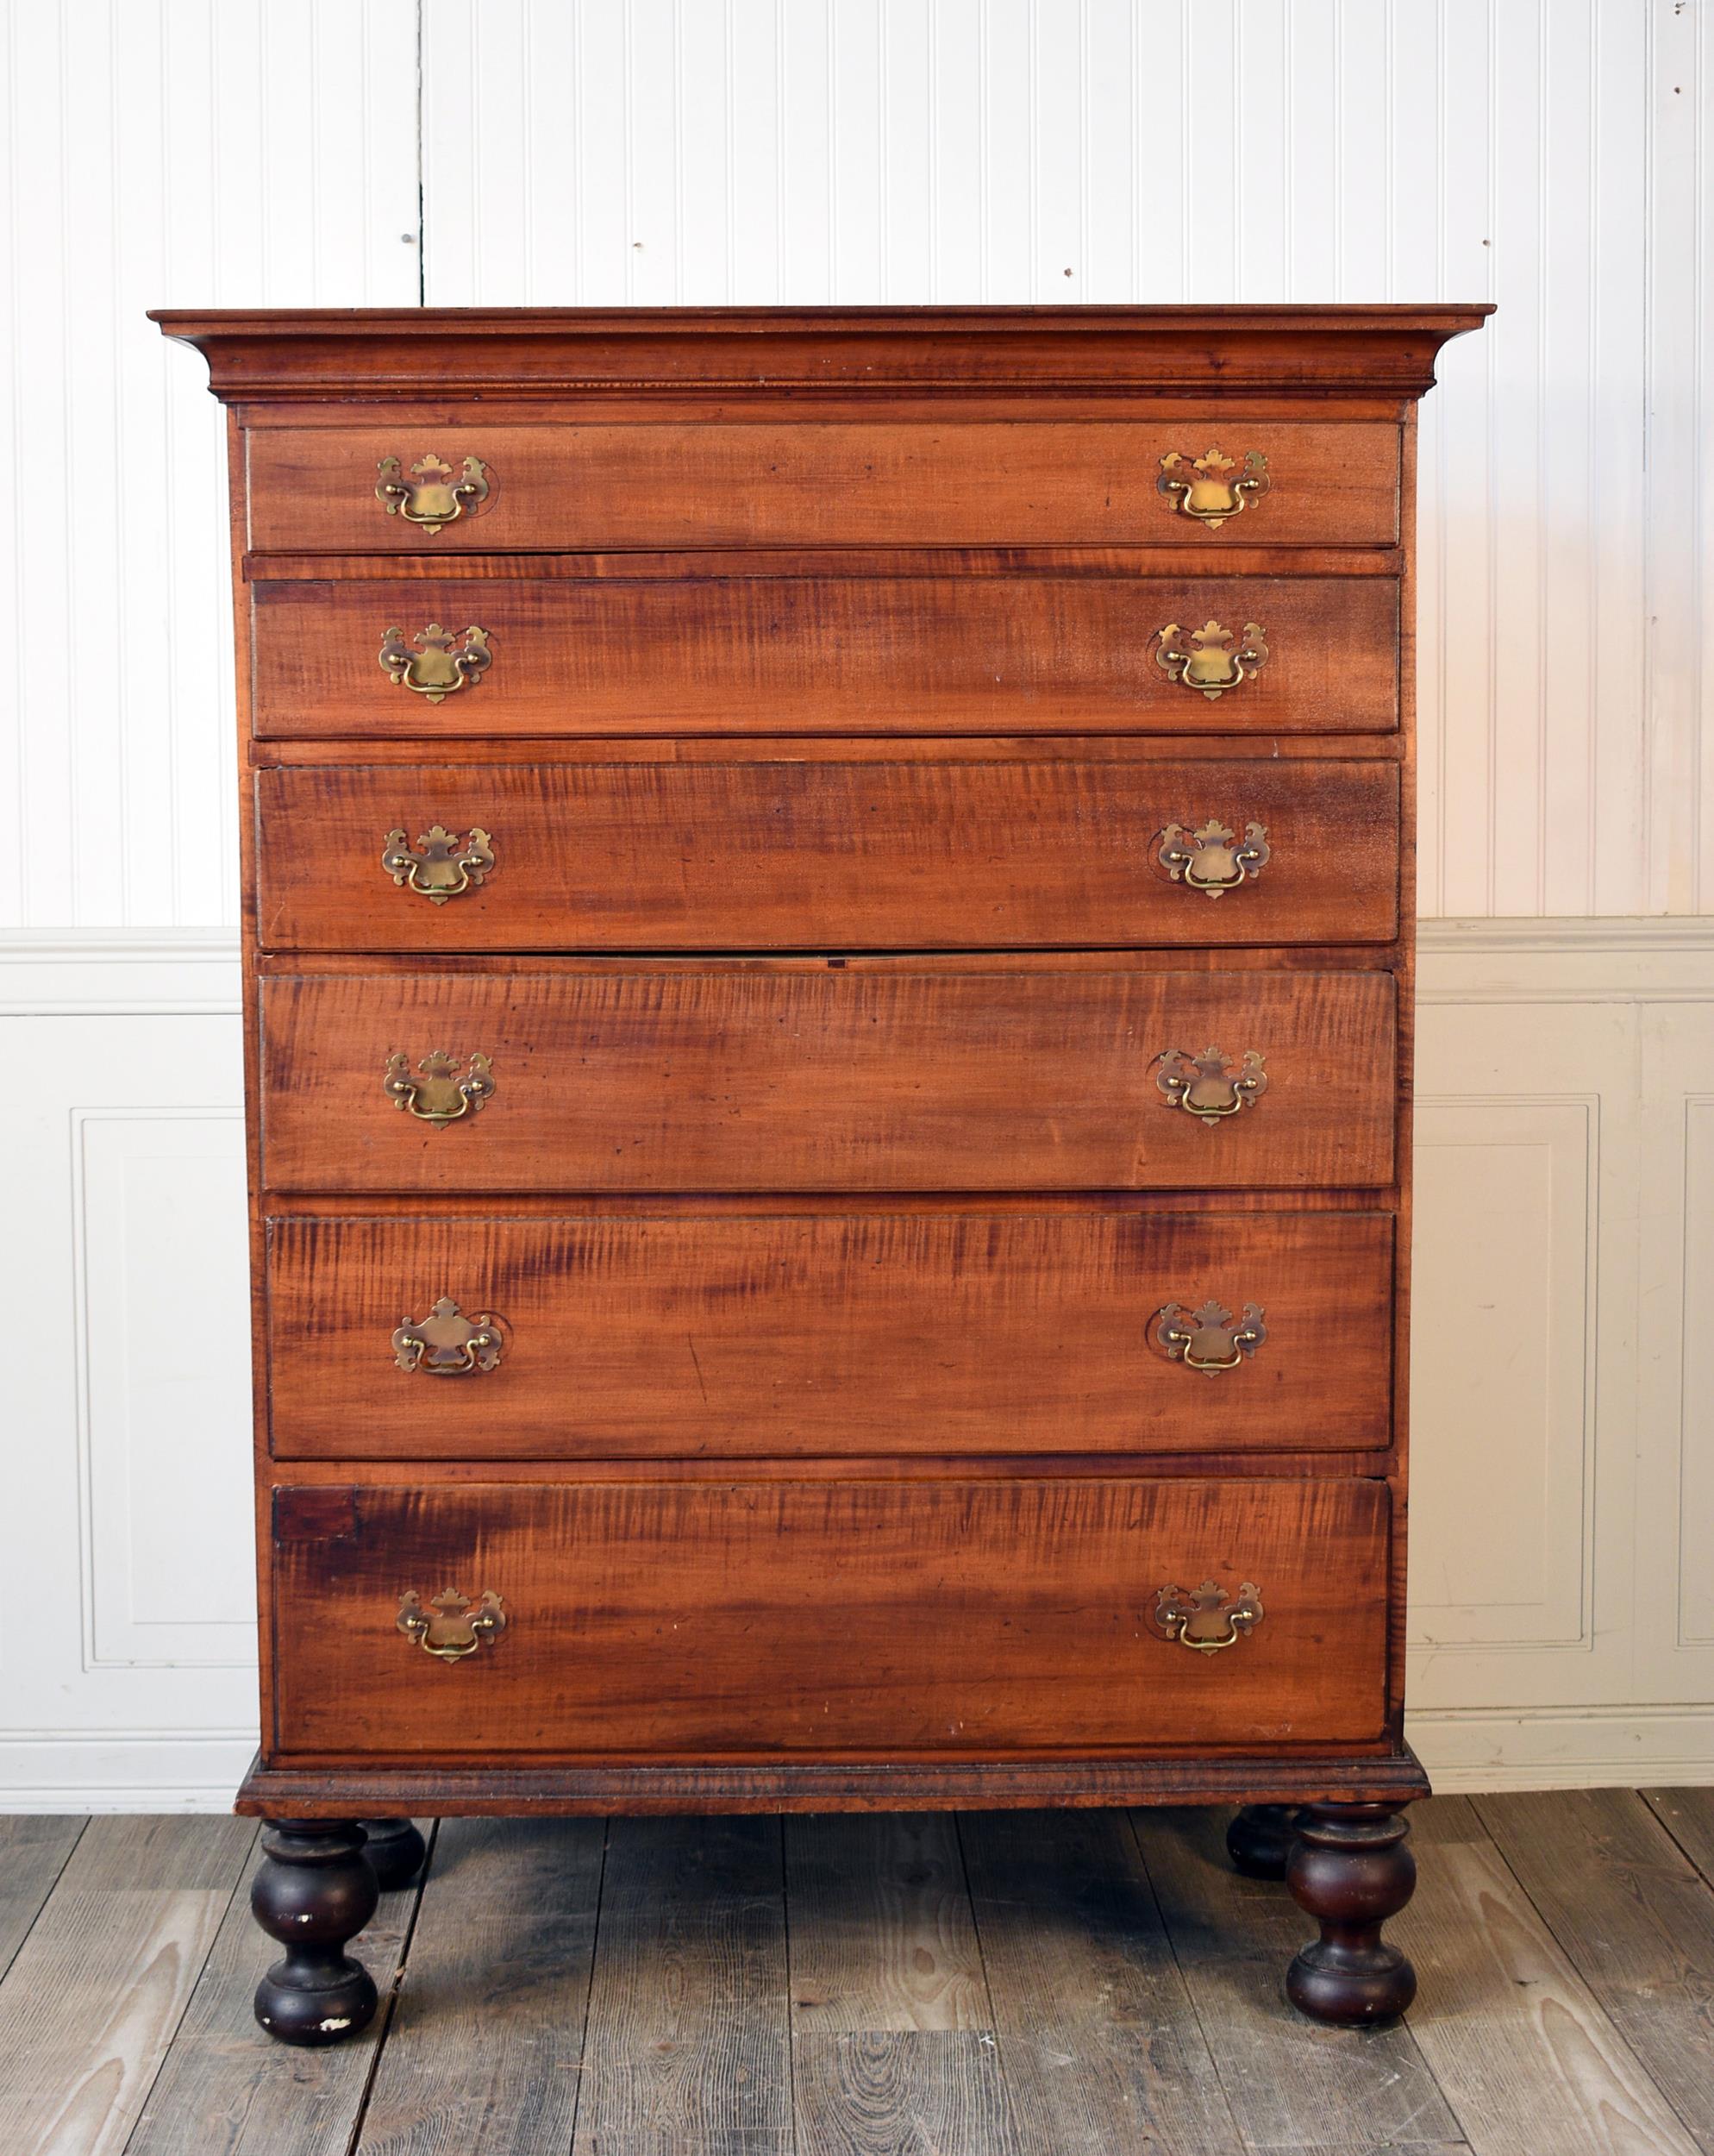 PERIOD TIGER MAPLE TALL CHEST  307495